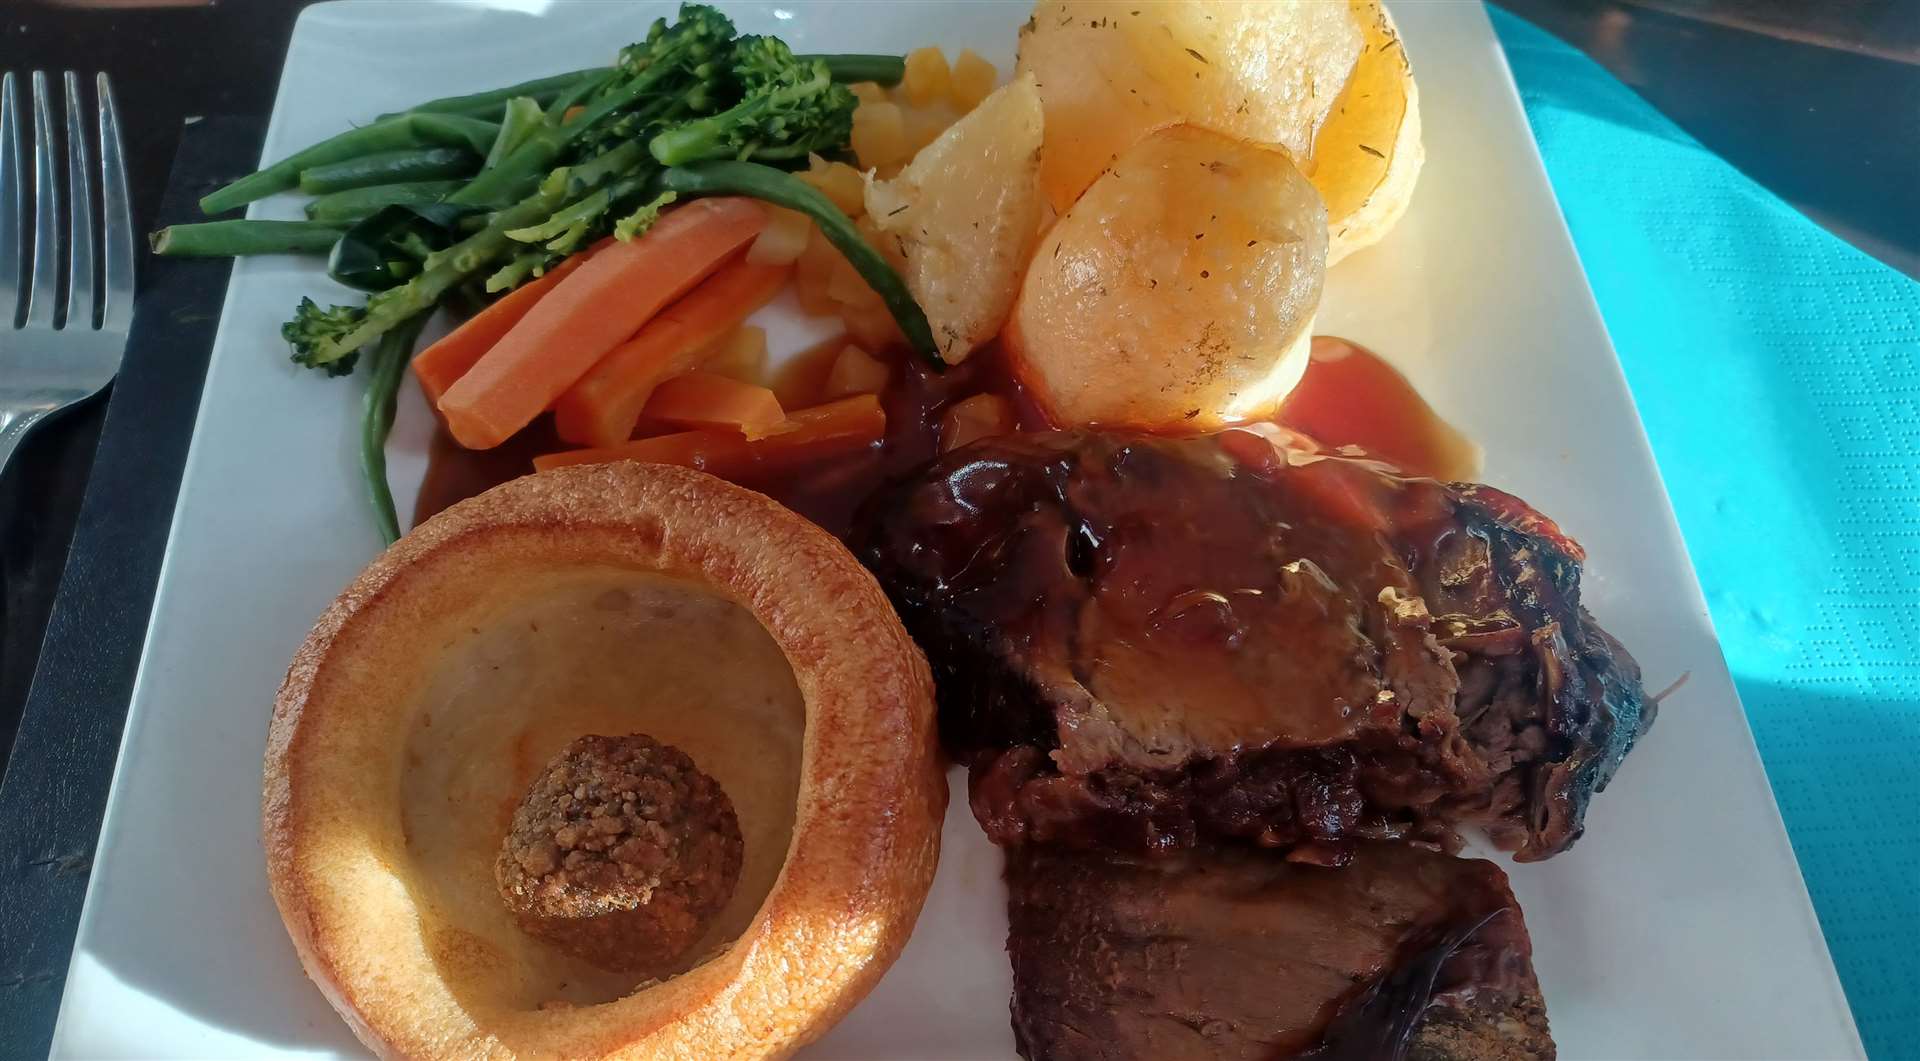 The roast beef was lovely